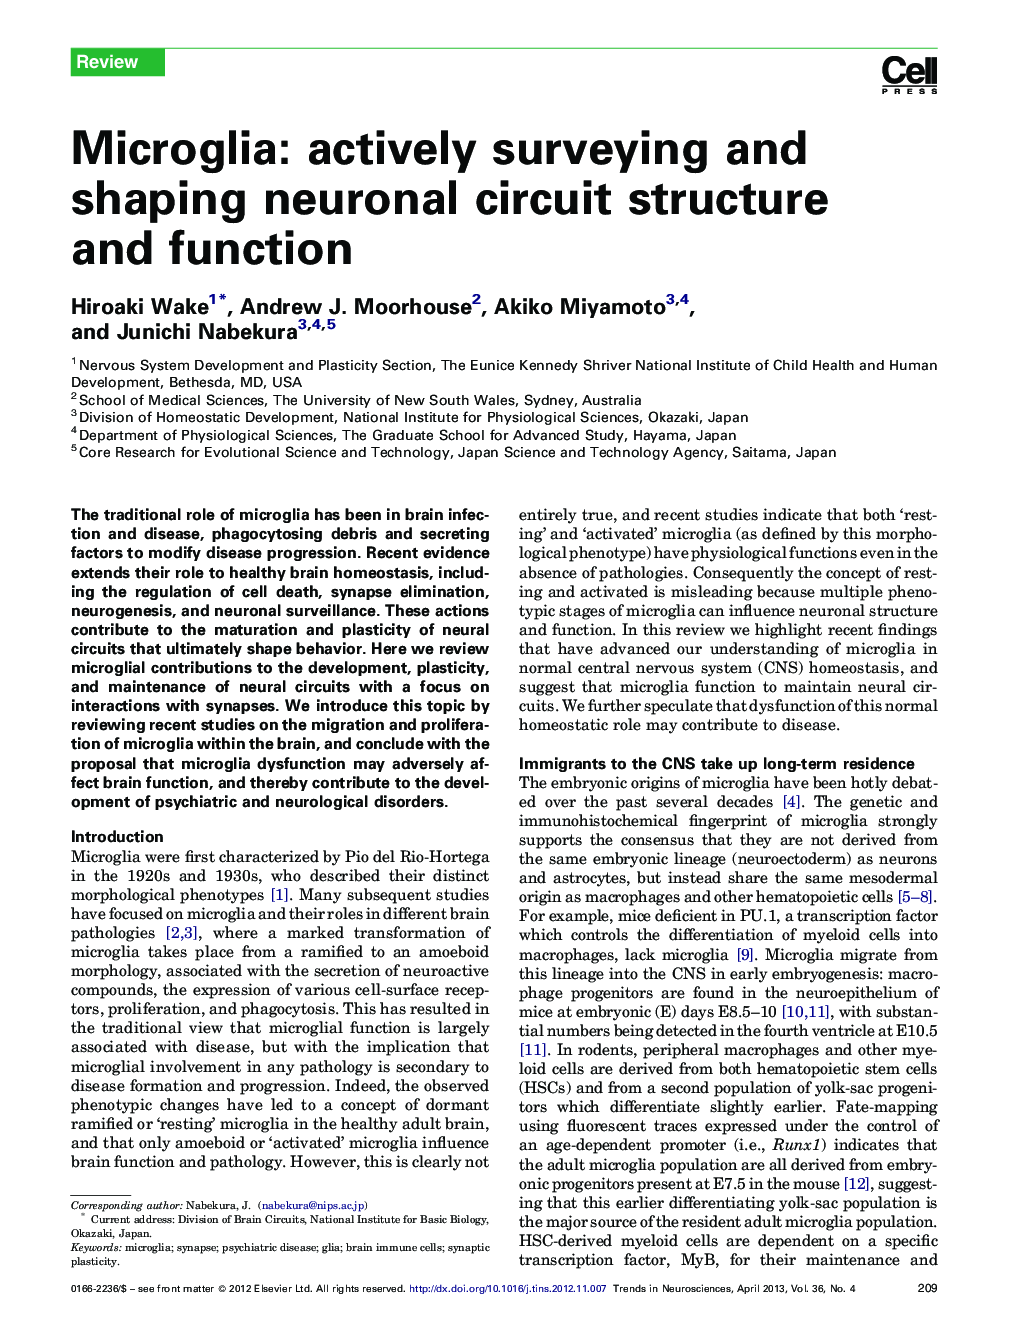 Microglia: actively surveying and shaping neuronal circuit structure and function